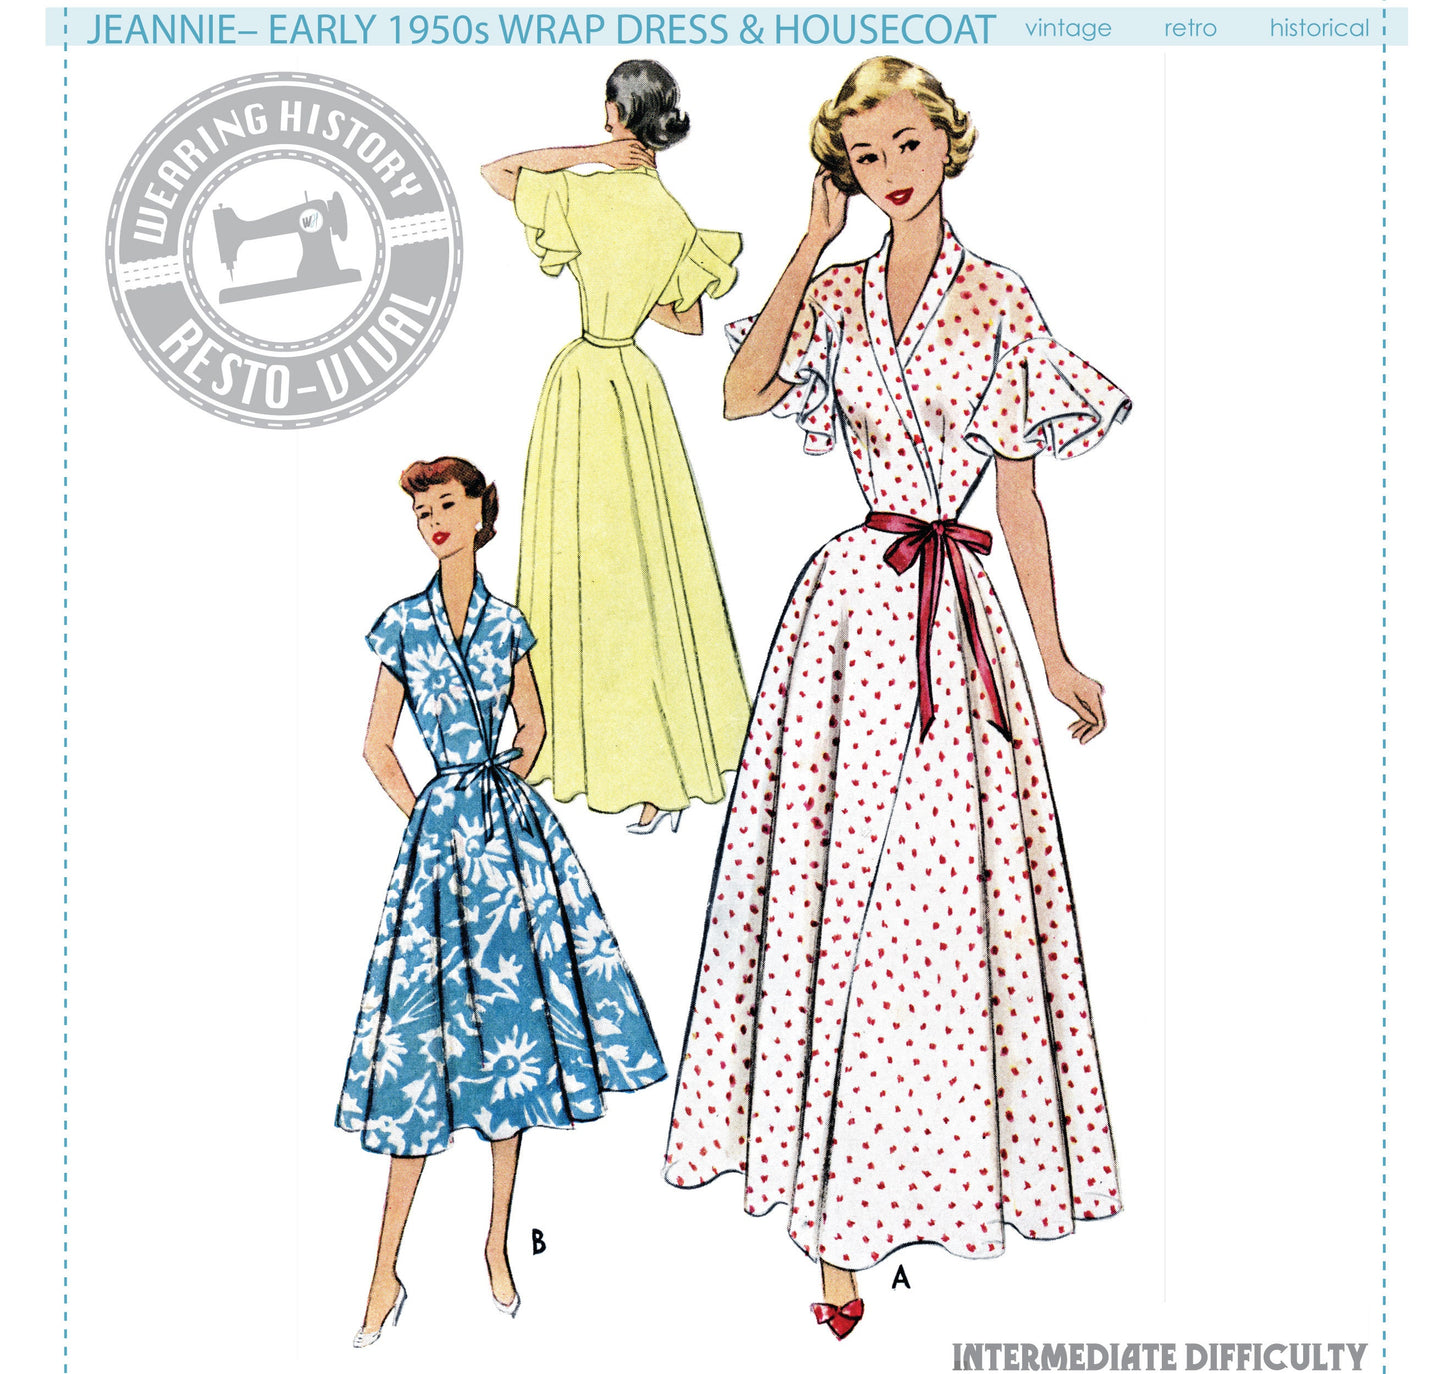 PRINTED PATTERN- 1950s "Jeannie" Wrap Dress & House Coat Pattern- Sizes 30-46" Bust